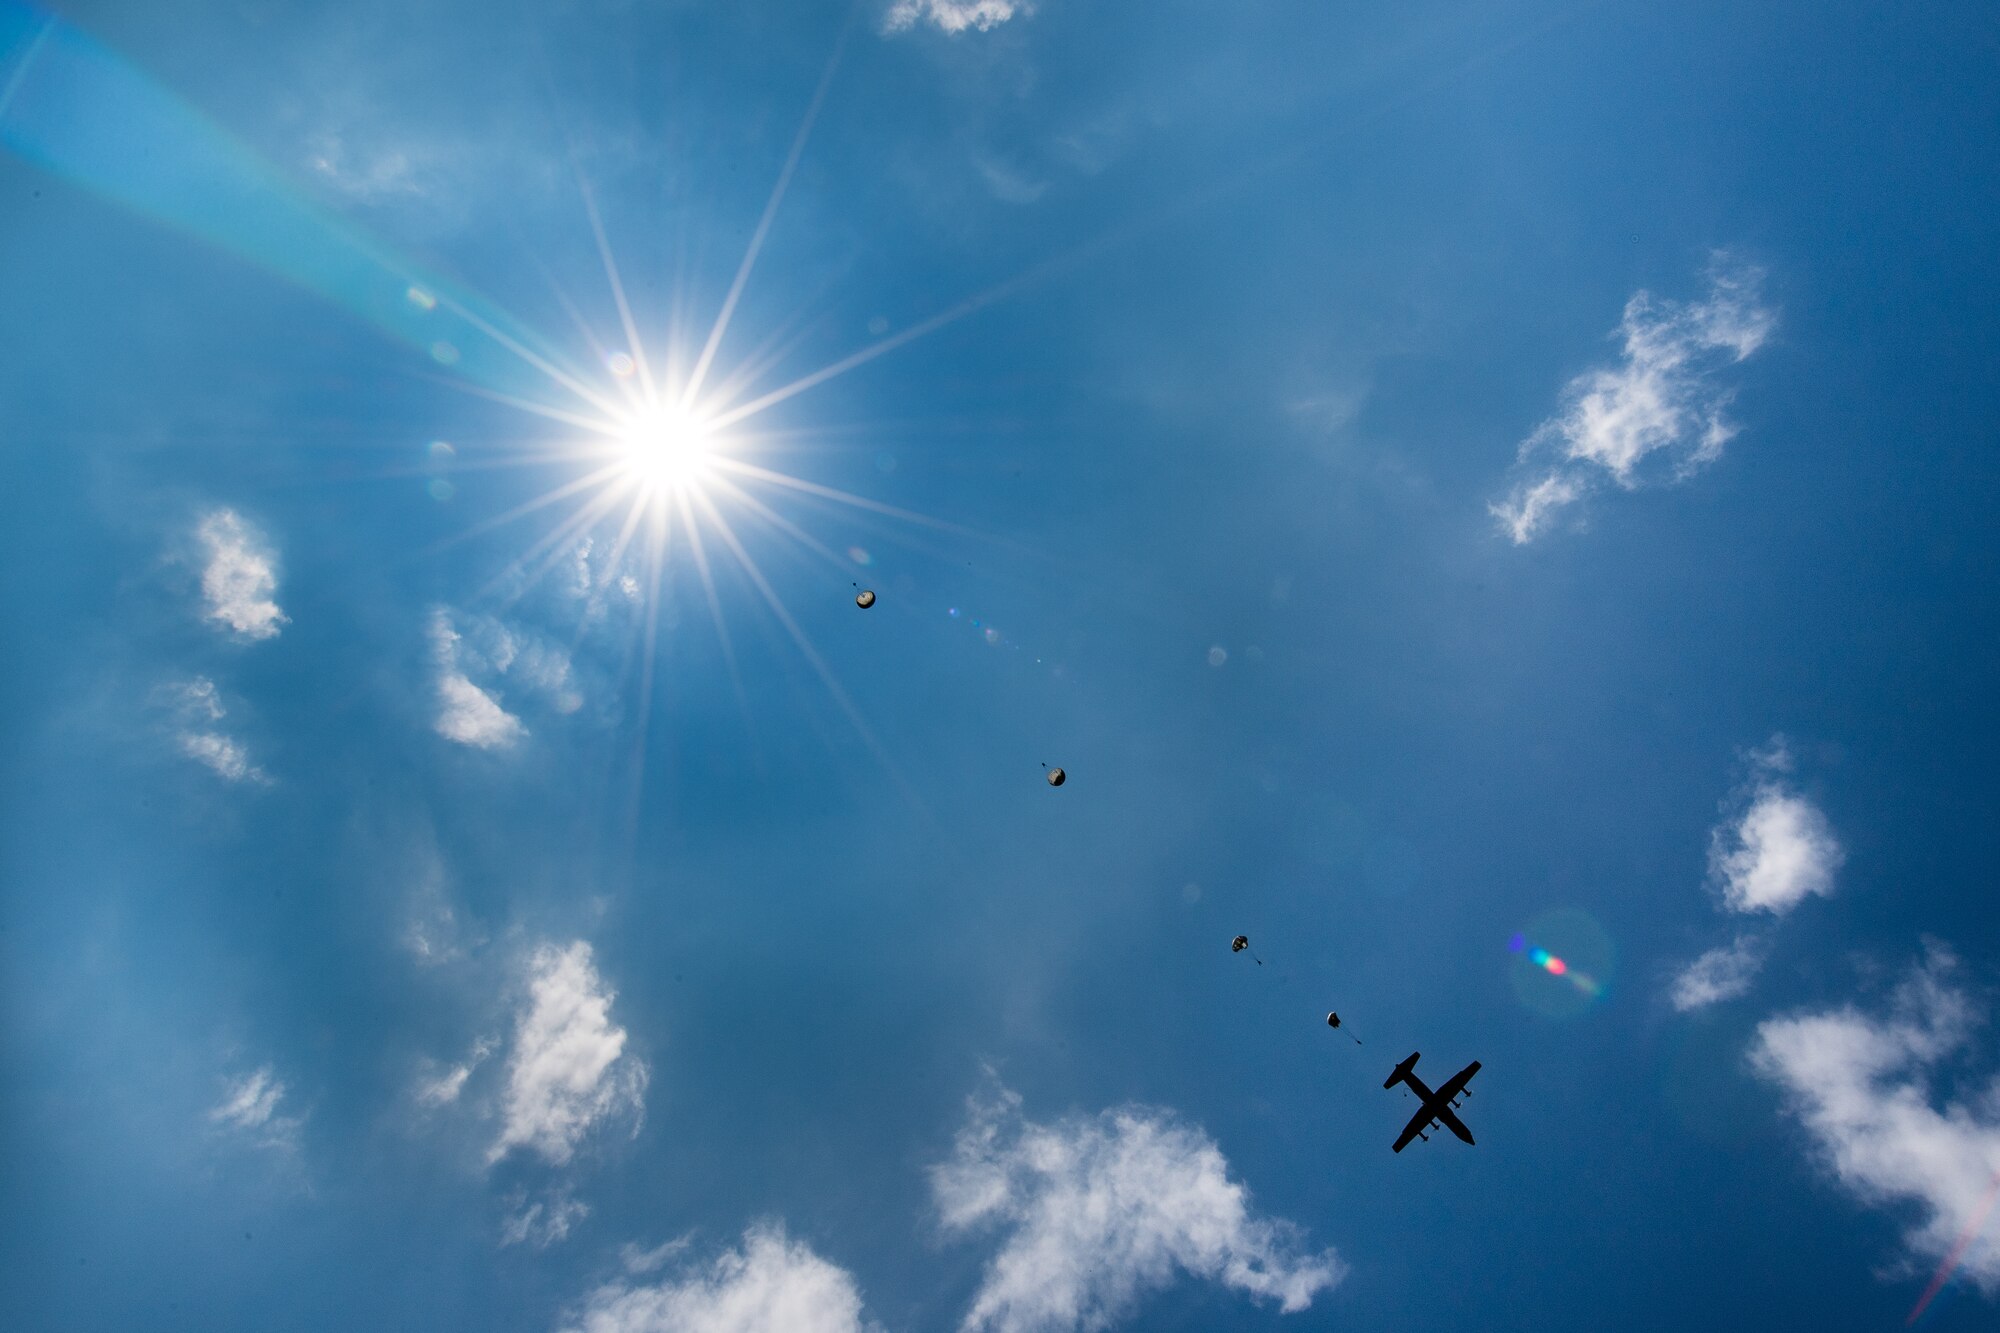 Romanian air force paratroopers descend from the sky after jumping out of a U.S. Air Force C-130J Super Hercules aircraft assigned to the 37th Airlift Squadron, Ramstein Air Base, Germany, over Boboc Air Base, Romania, Aug. 23, 2018. The airdrops were part of exercise Carpathian Summer 2018, a bilateral training exercise designed to enhance interoperability and readiness of forces by conducting combined air operations with the Romanian air force. (U.S. Air Force photo by Senior Airman Devin Boyer)